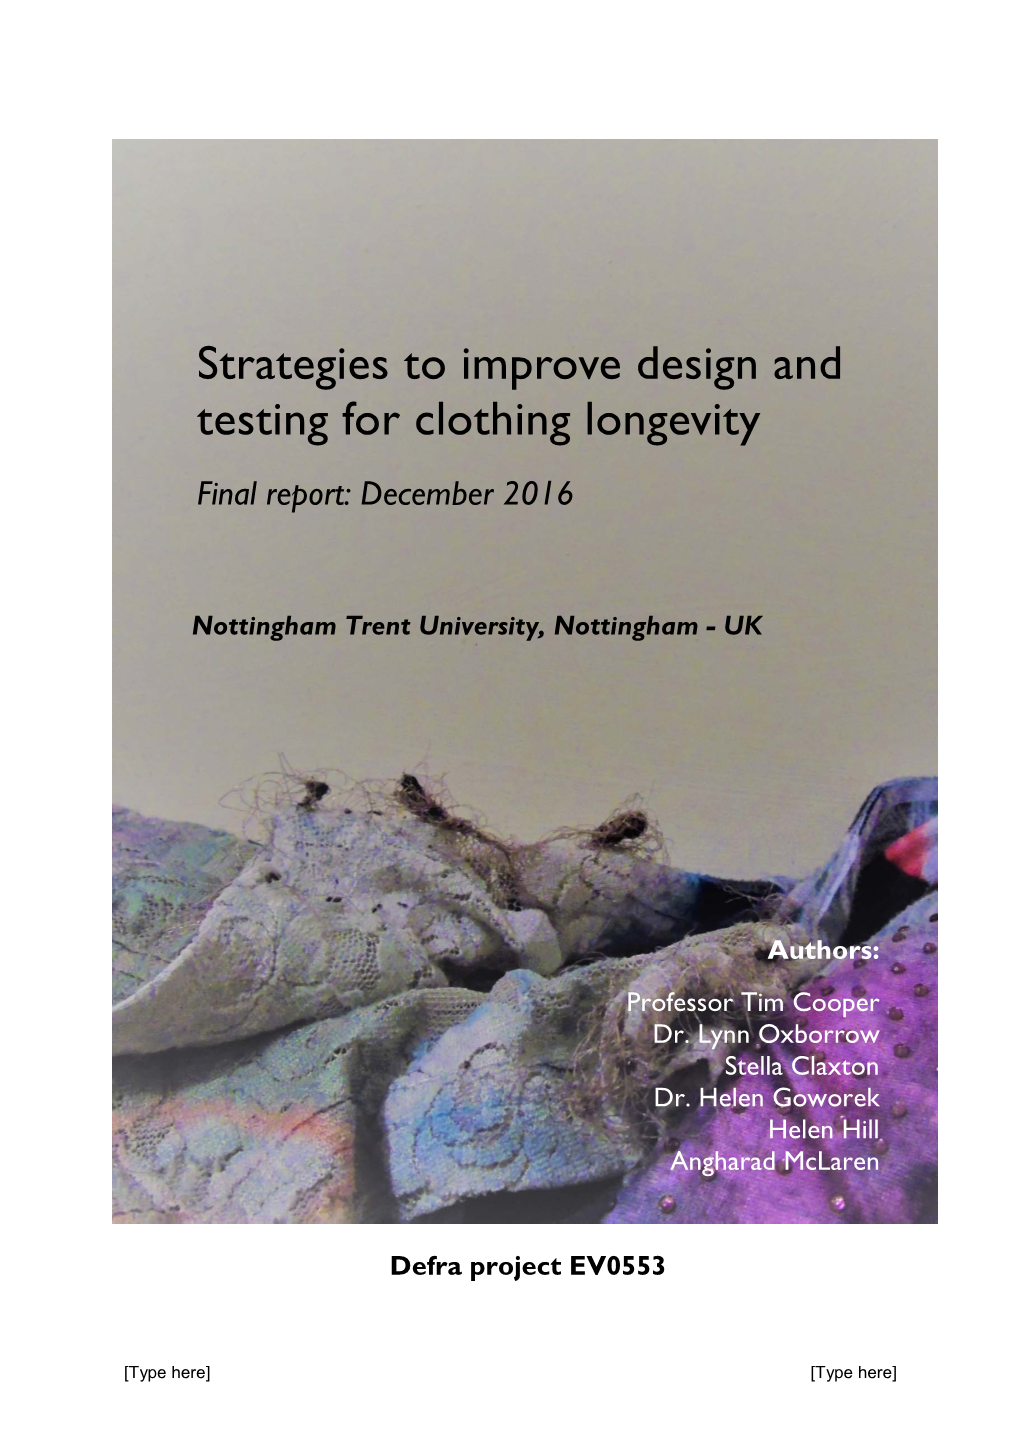 Strategies to Improve Design and Testing for Clothing Longevity Final Report: December 2016